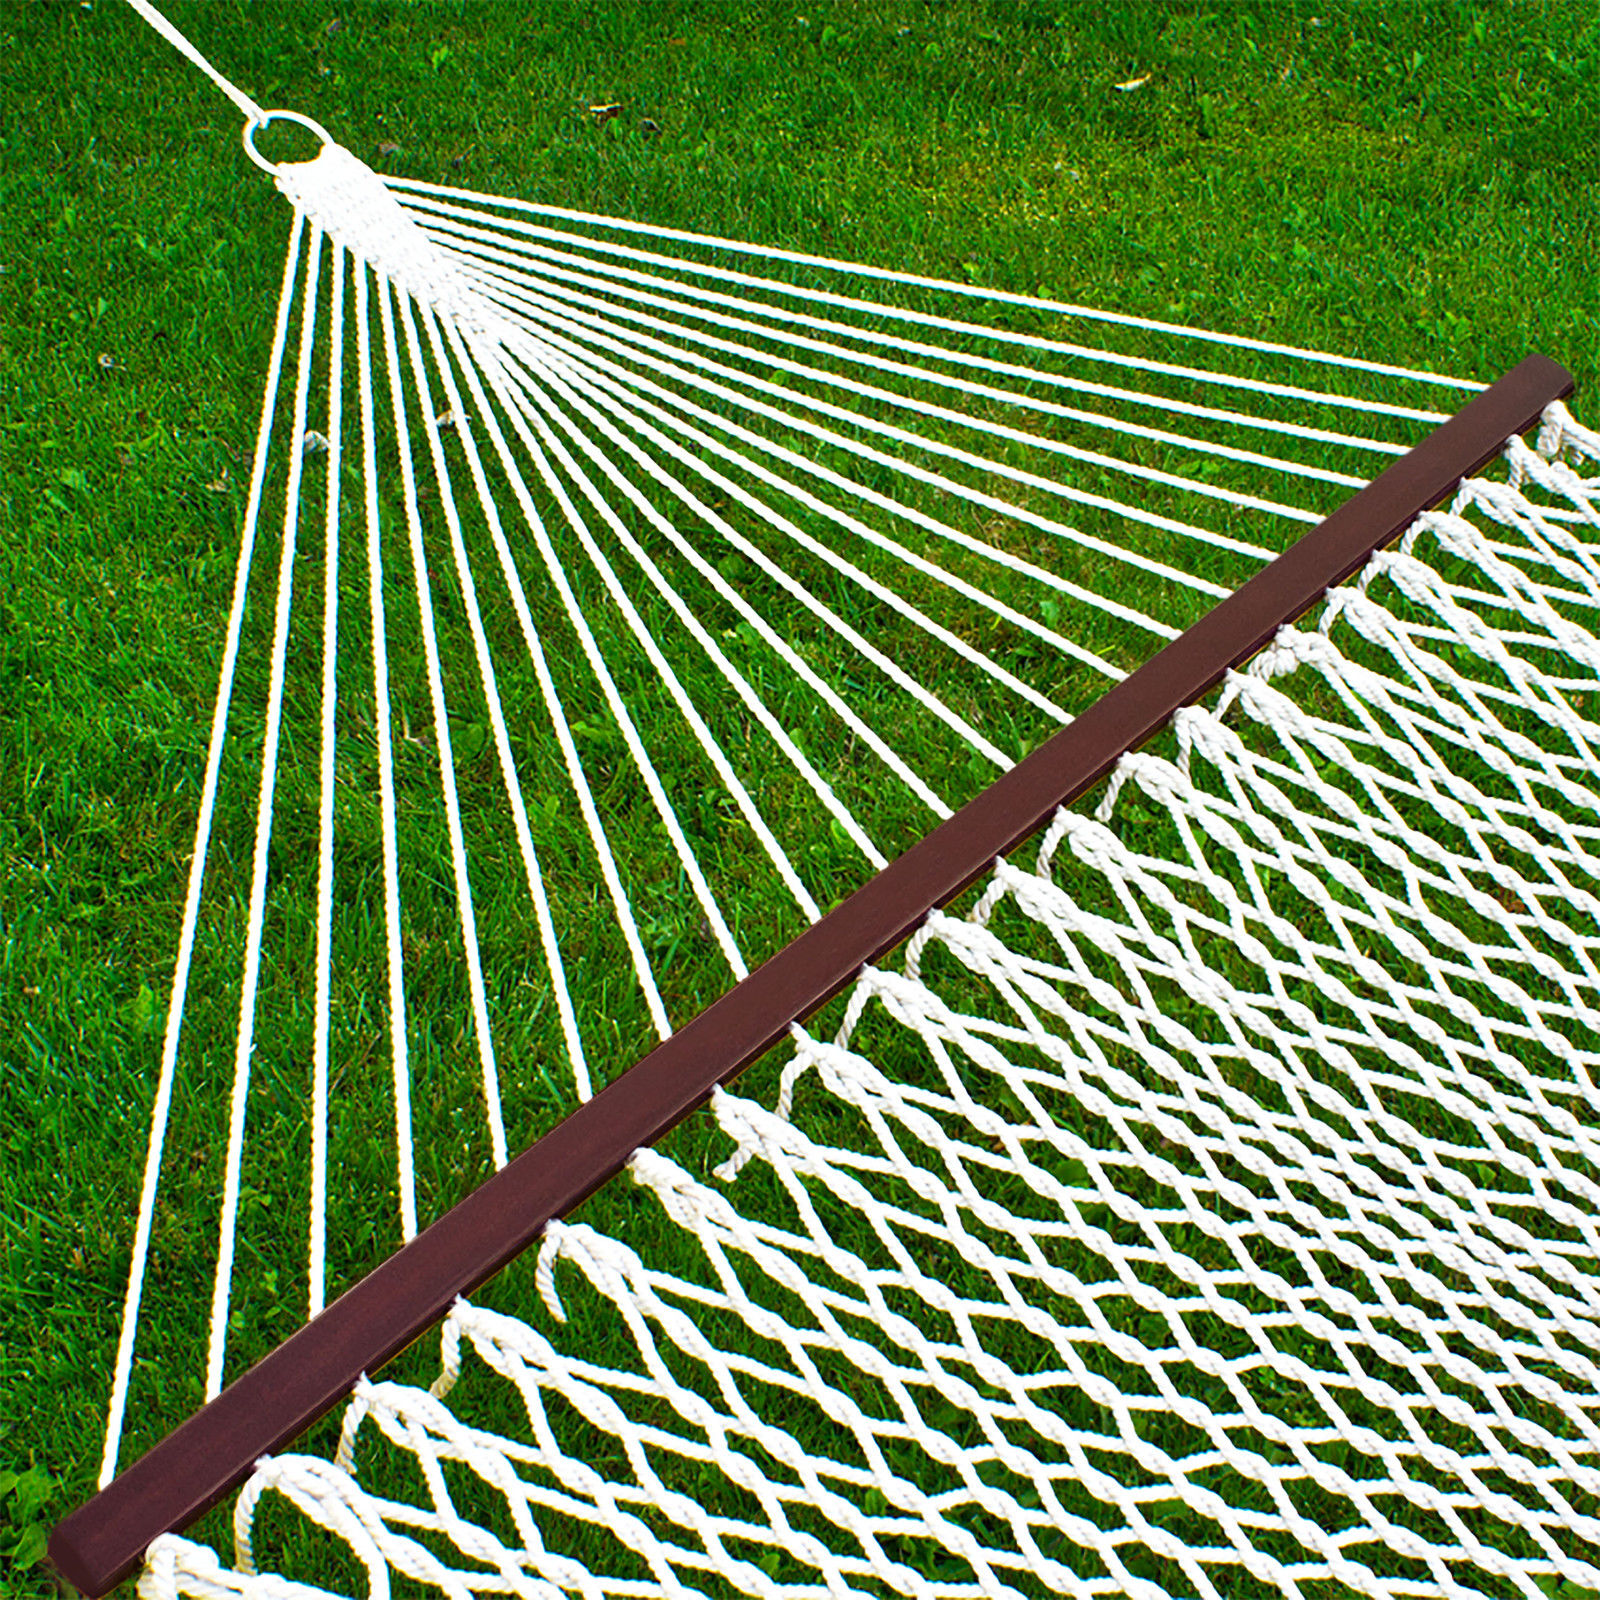 59″ cotton double wide outdoor yard hammock for $33 shipped